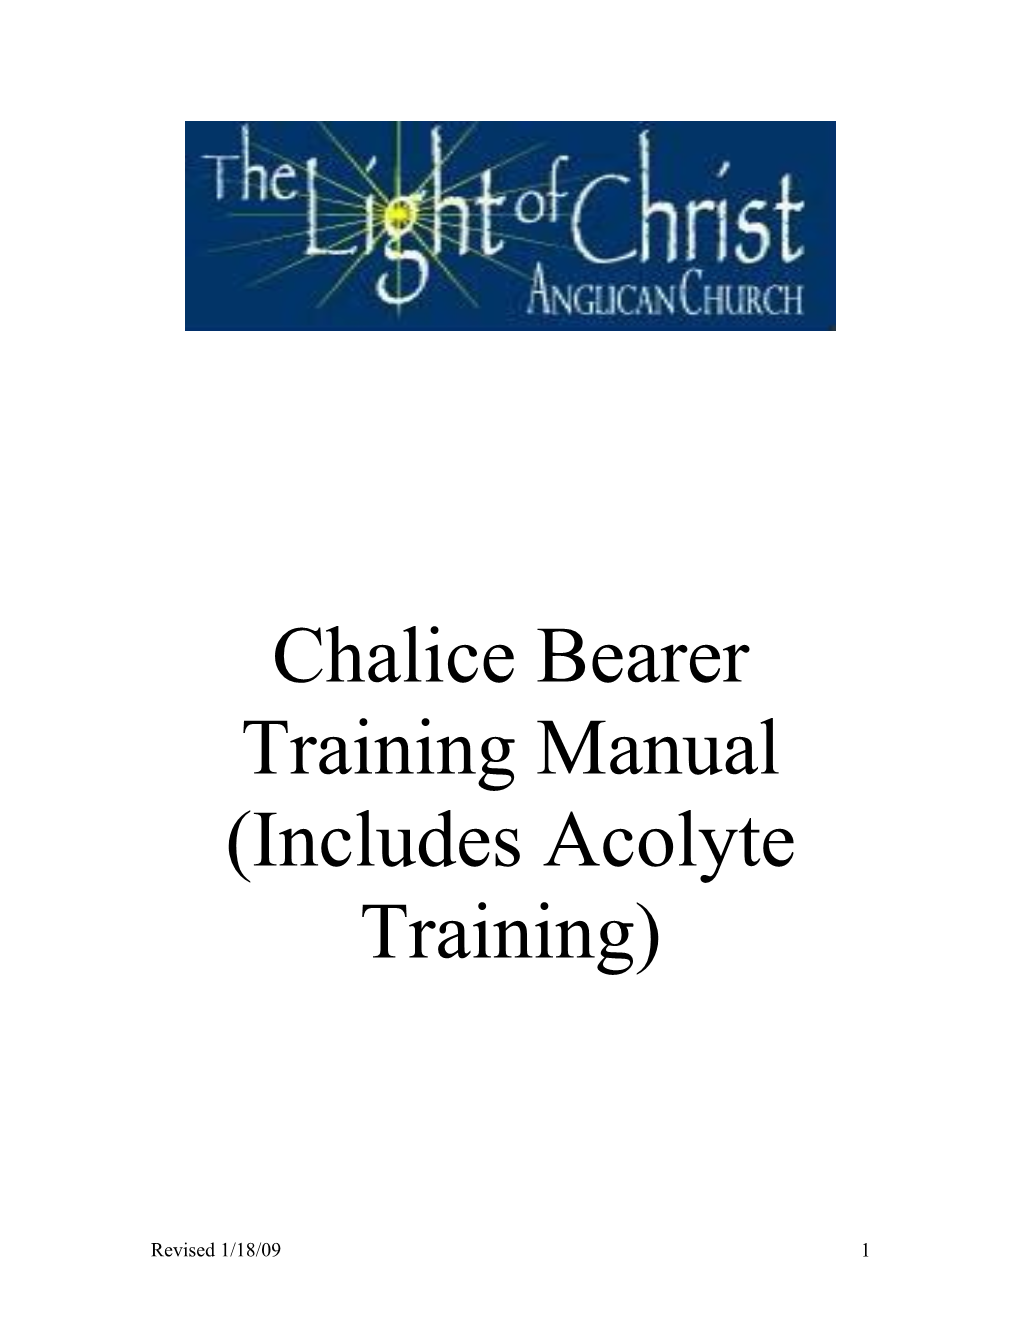 Chalice Bearer Training Manual (Includes Acolyte Training)